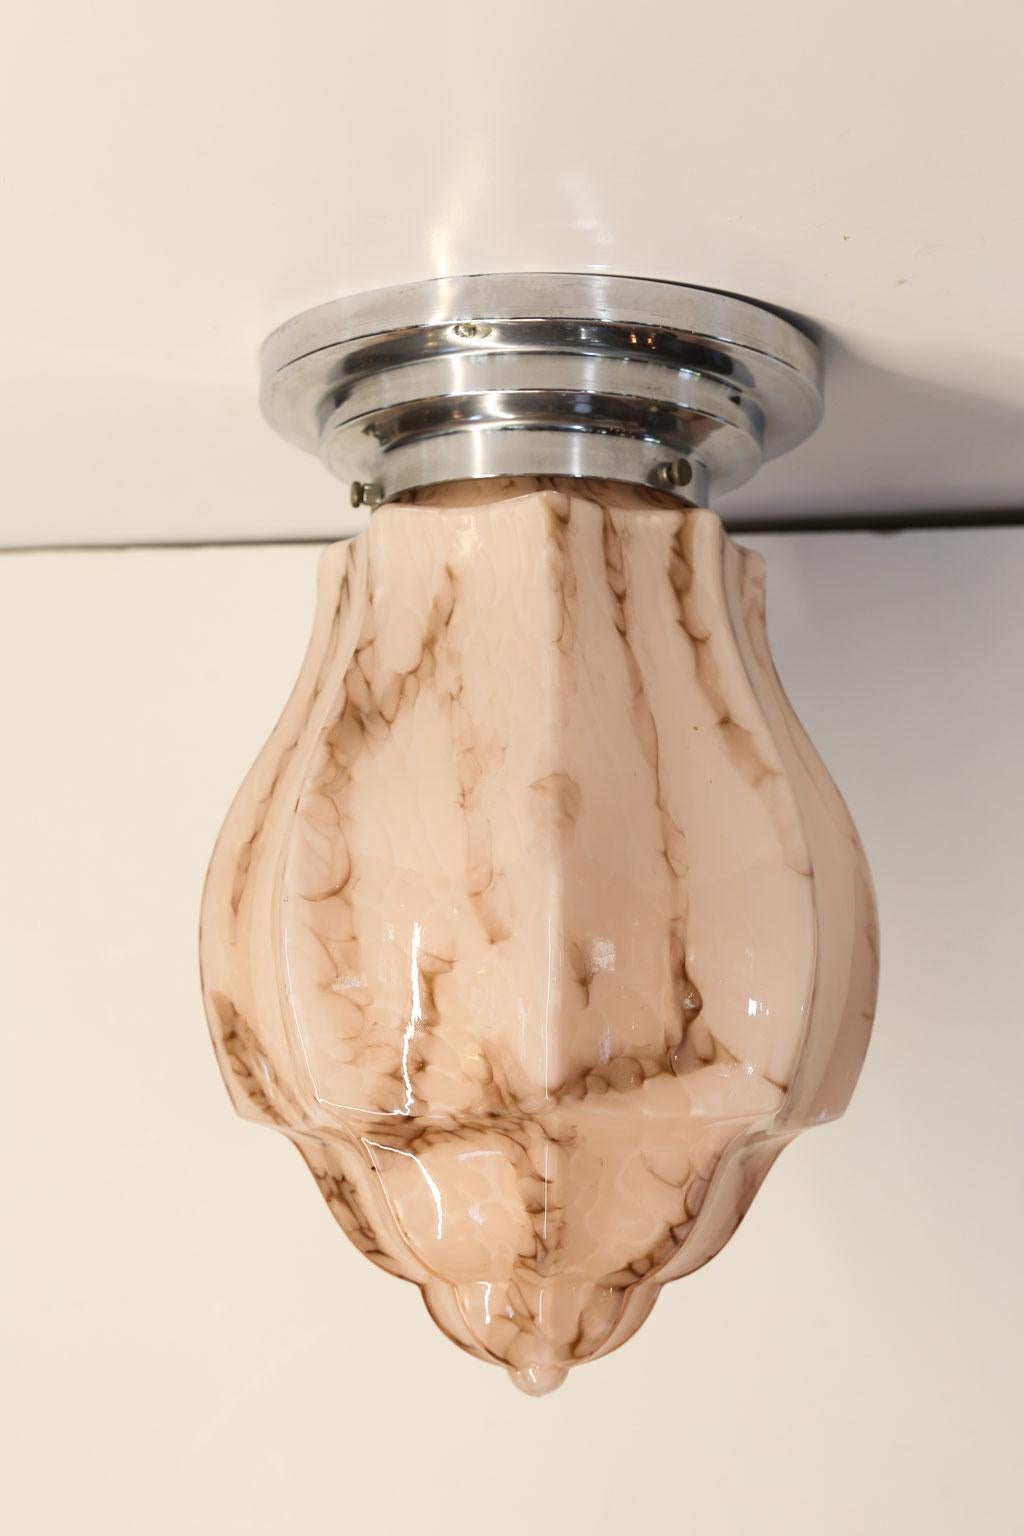 Pair of skyscraper flush mount lights: pinkish blush glass and chrome deco banding. Newly wired for use within the USA using all UL listed parts. Can also serve as stunning wall lights or sconces.  The lights are a wonderful pink/blush color.